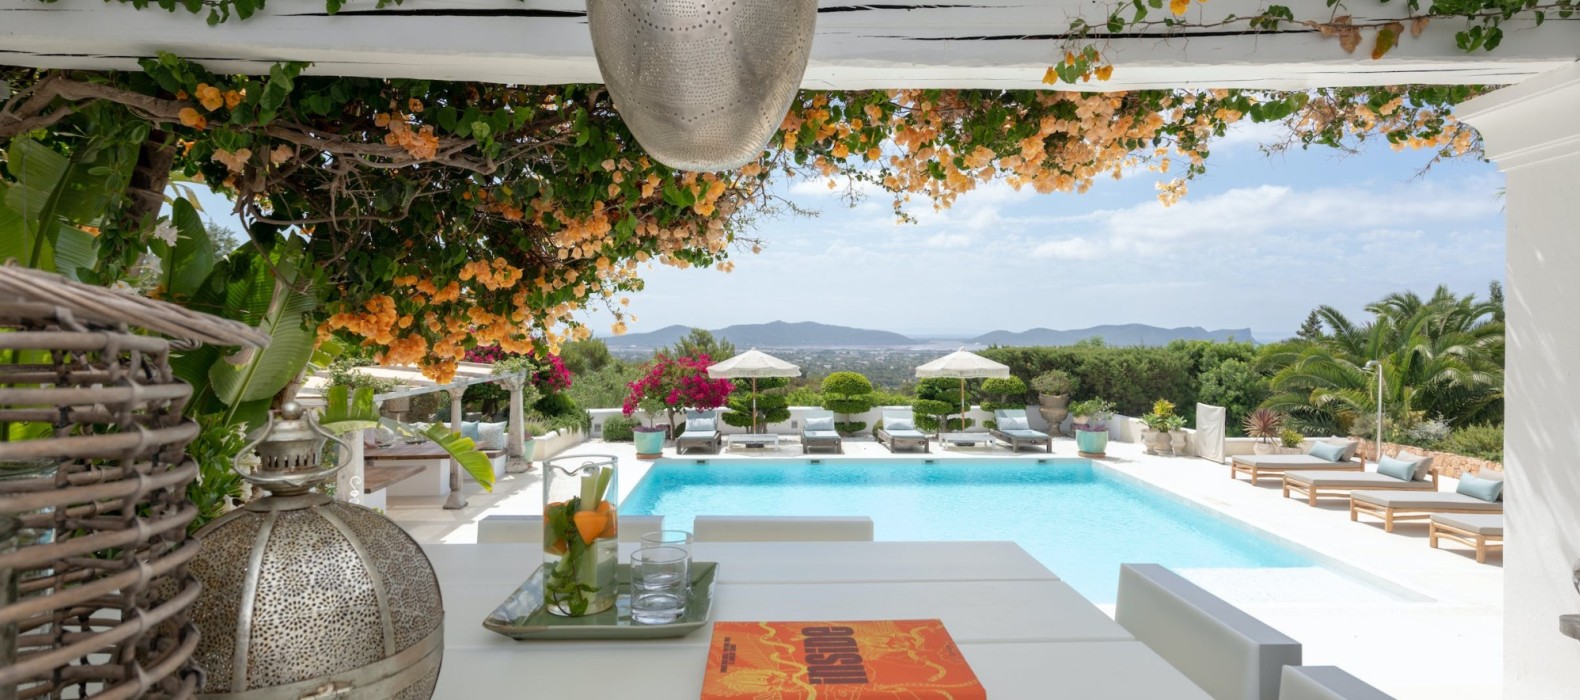 Exterior dining table with pool view of Villa Glamour in Ibiza